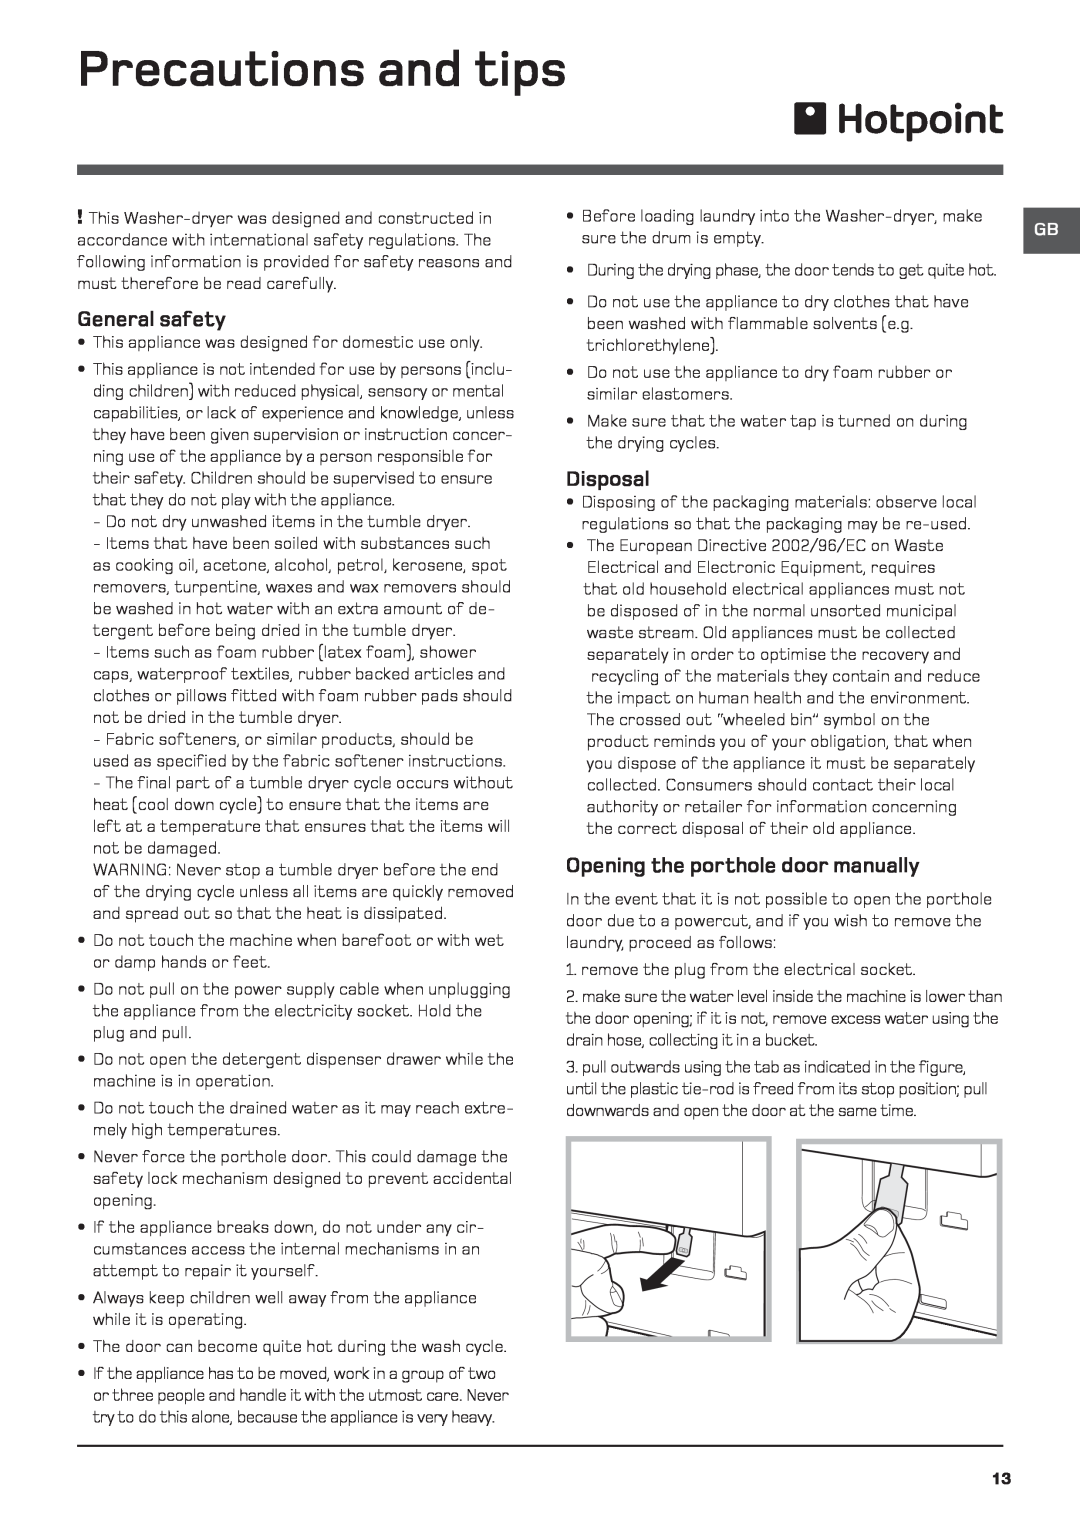 Hotpoint BHWD 129 Precautions and tips, General safety, Disposal, Opening the porthole door manually 